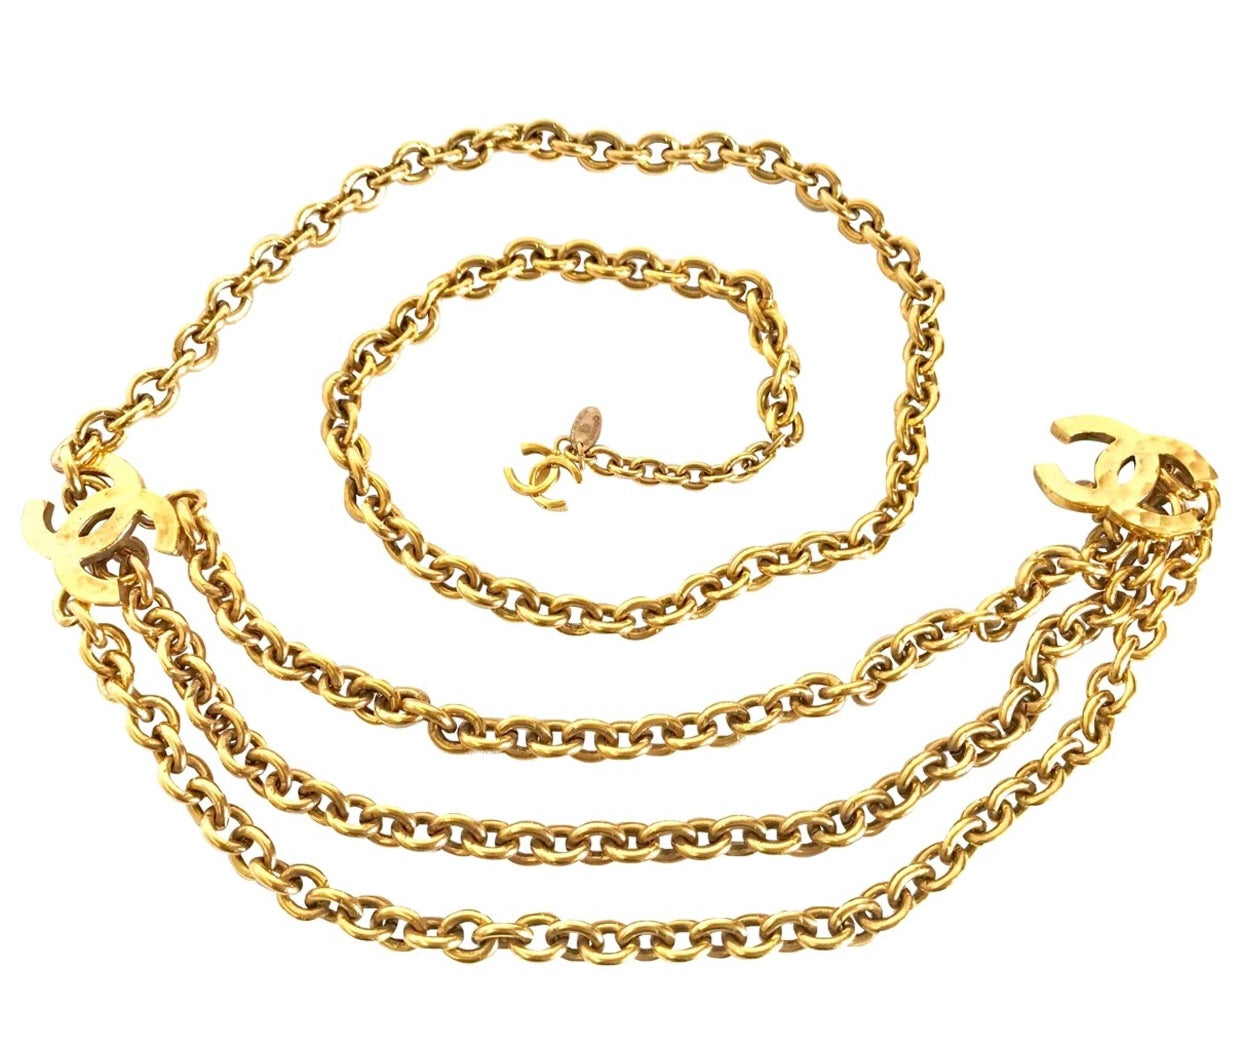 Chanel golden Chain Belt with little bag in brown leather – Fancy Lux